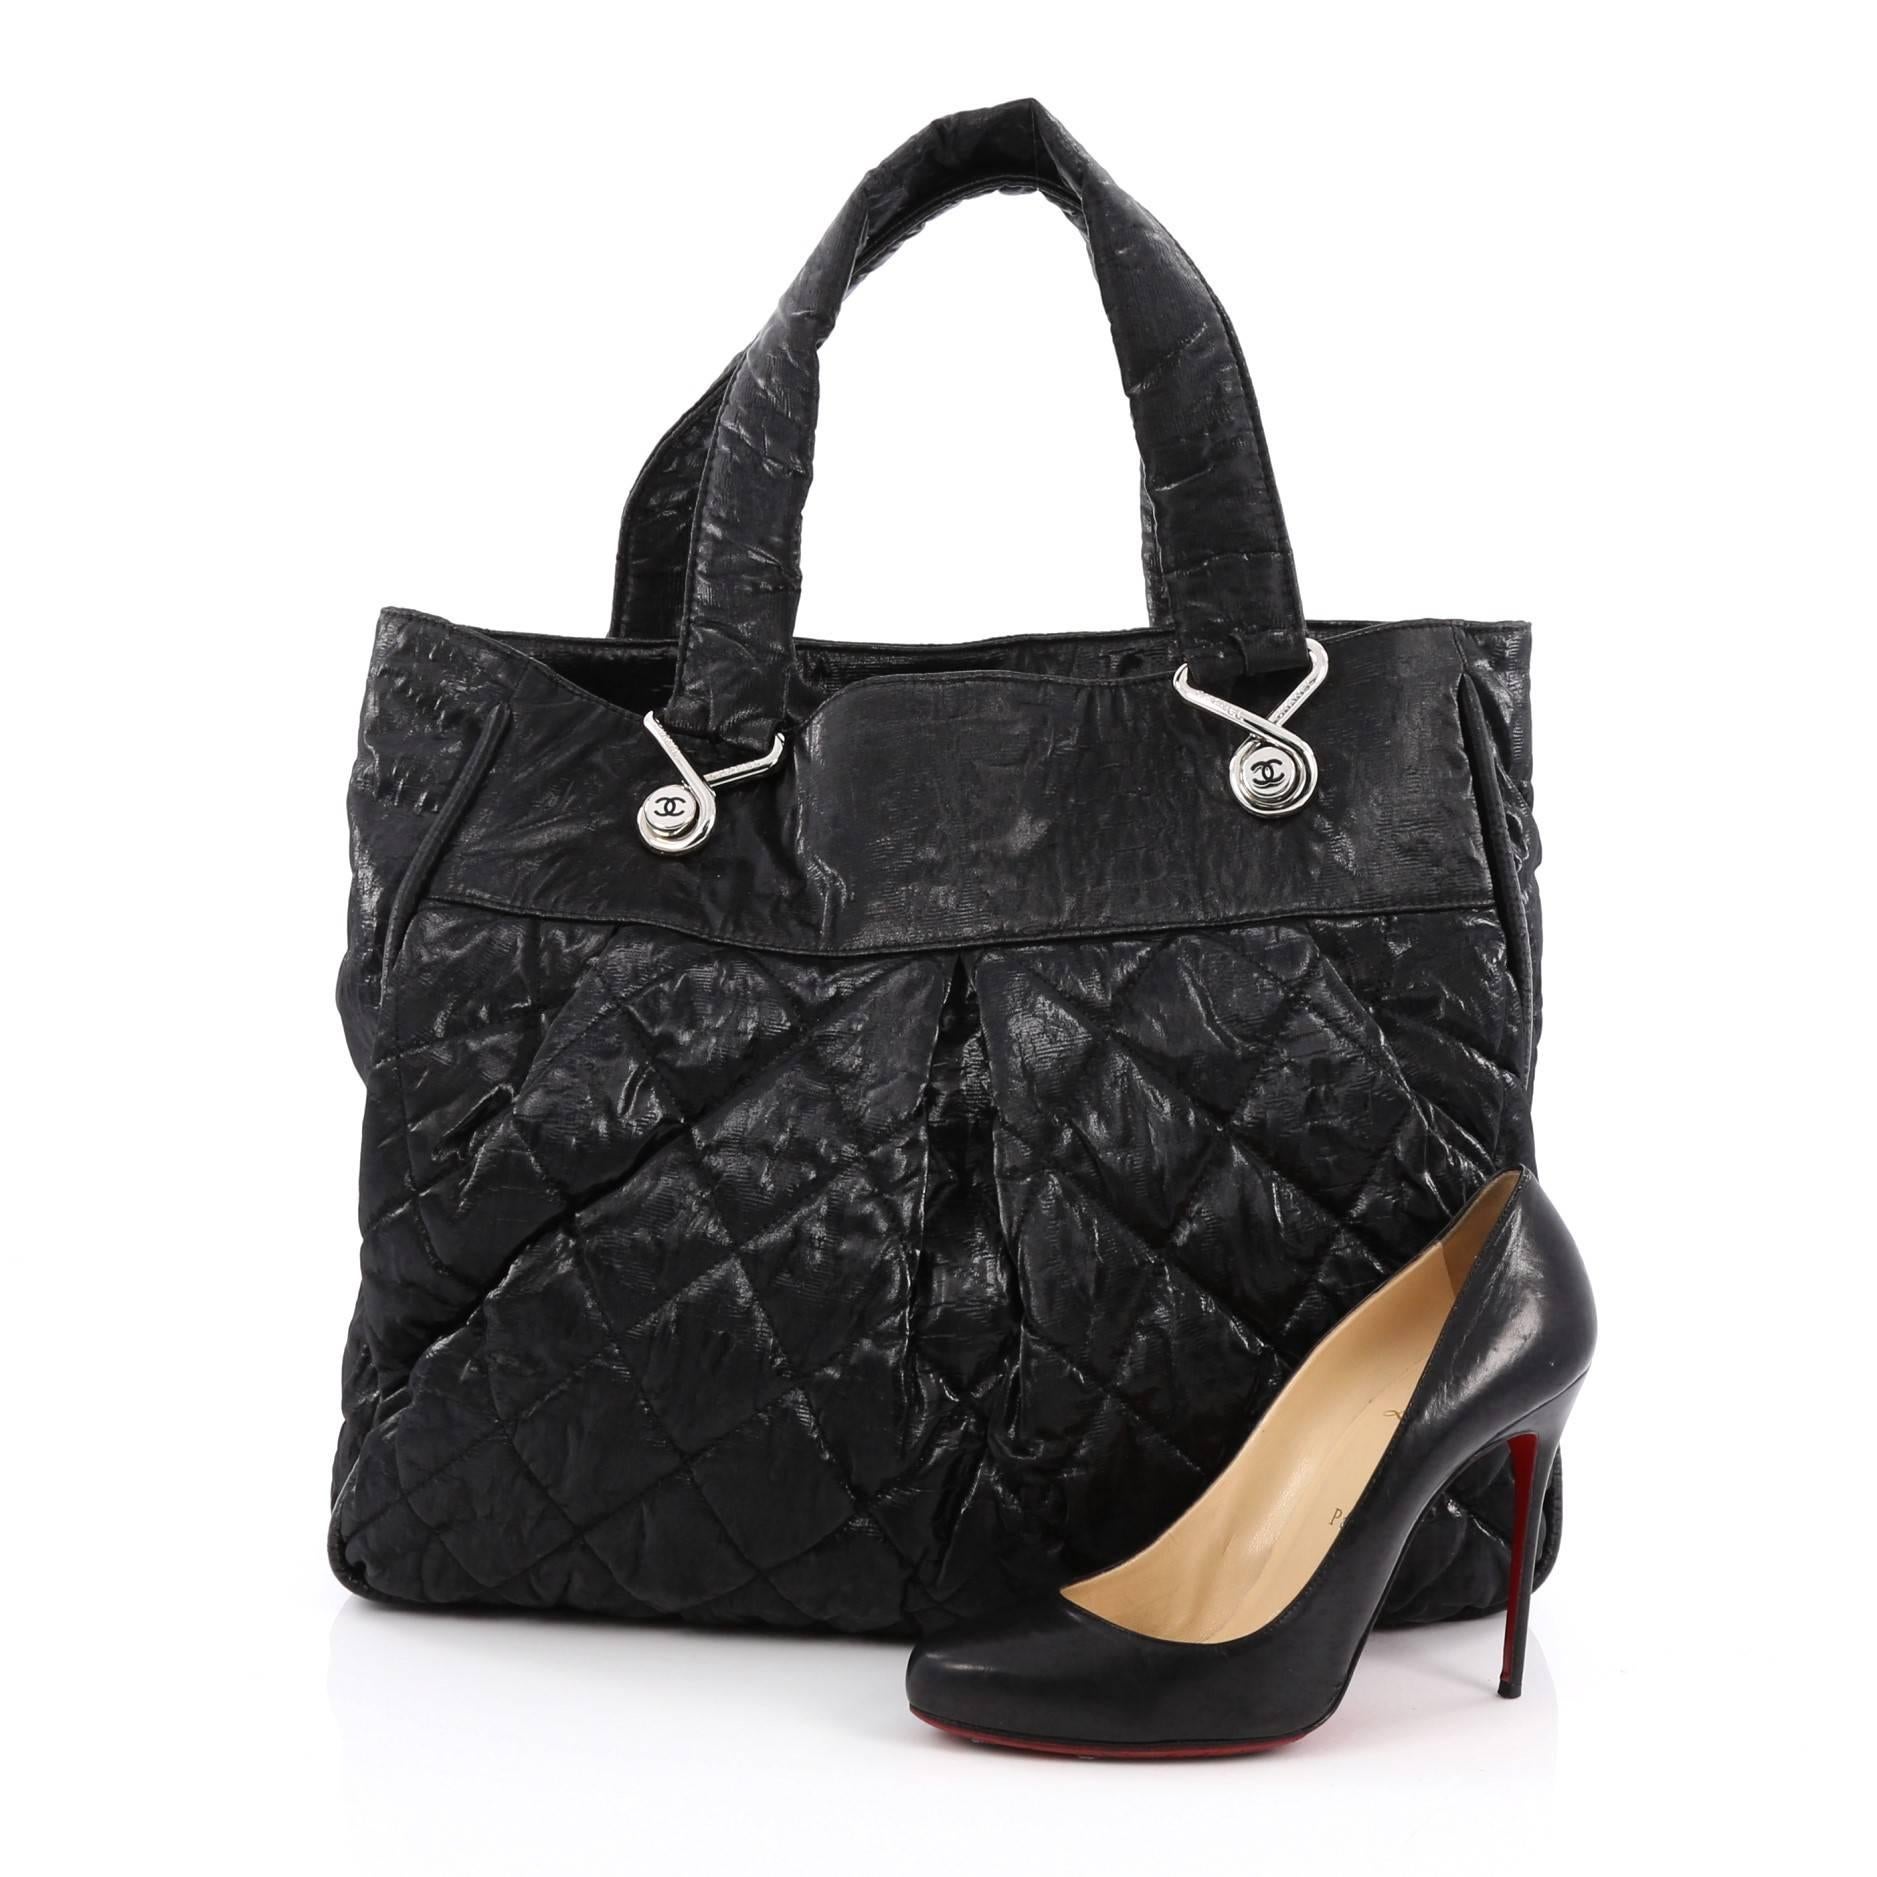 This authentic Chanel Le Marais Tote Quilted Coated Canvas Large from the brand's Pre-Fall 2009 Collection is a marvelous tote that is stylish and fabulously functional for everyday use. Crafted from black crinkled quilted coated canvas, this chic